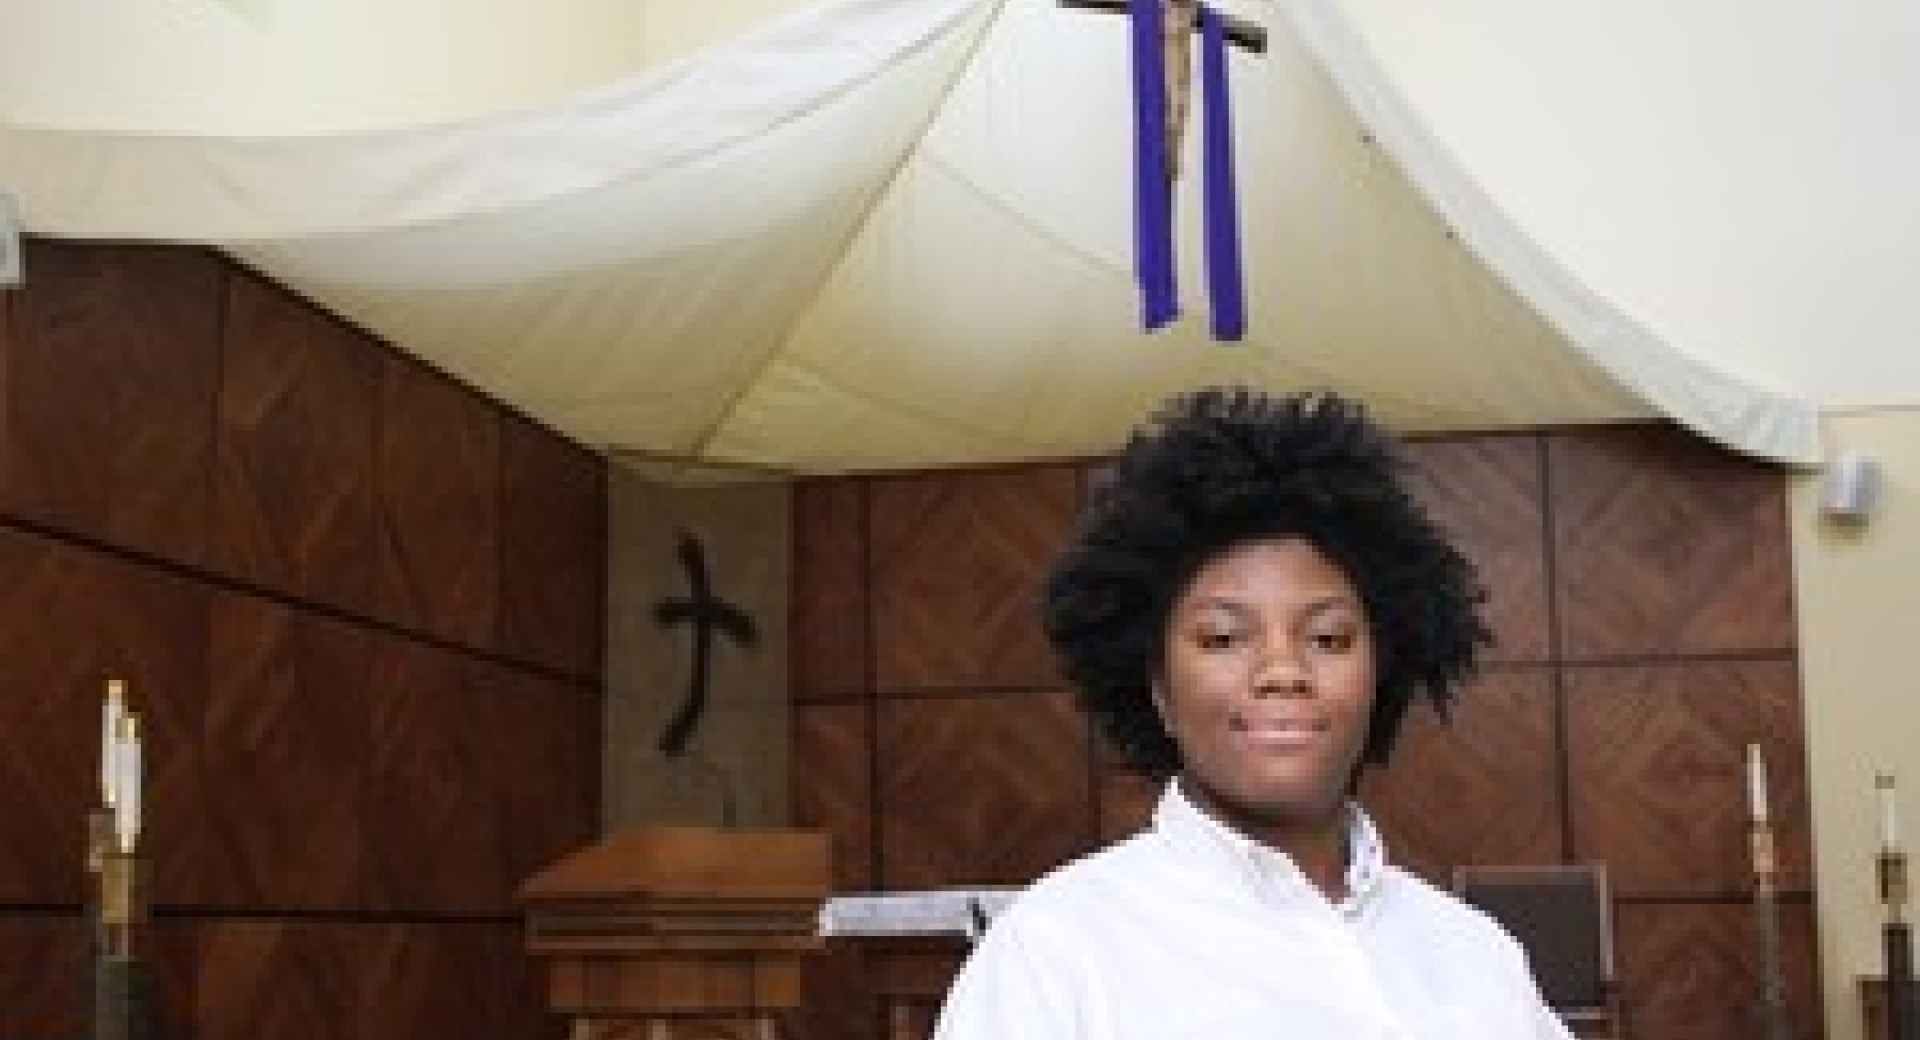 Foley Feature: A Student's Journey in Faith